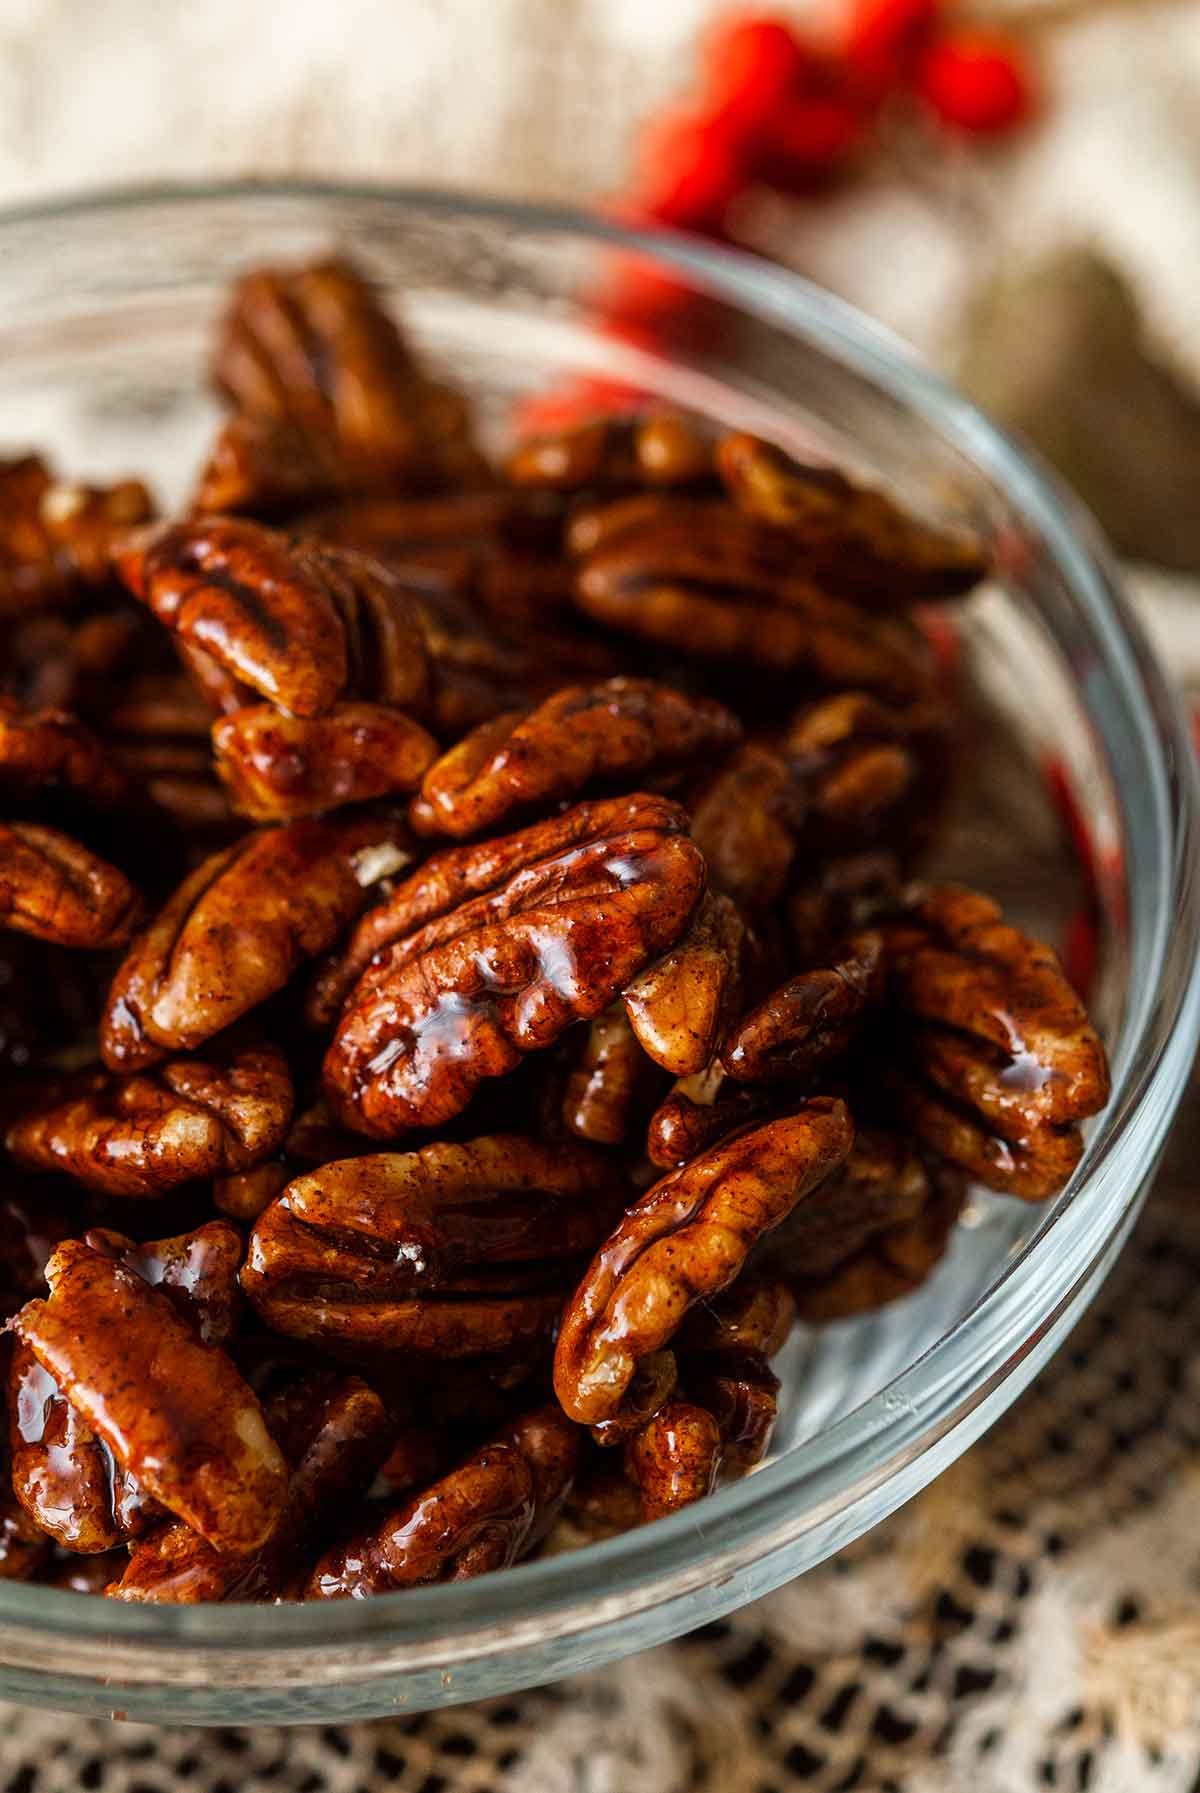 Candied pecans in a small bowl on a lace table cloth.